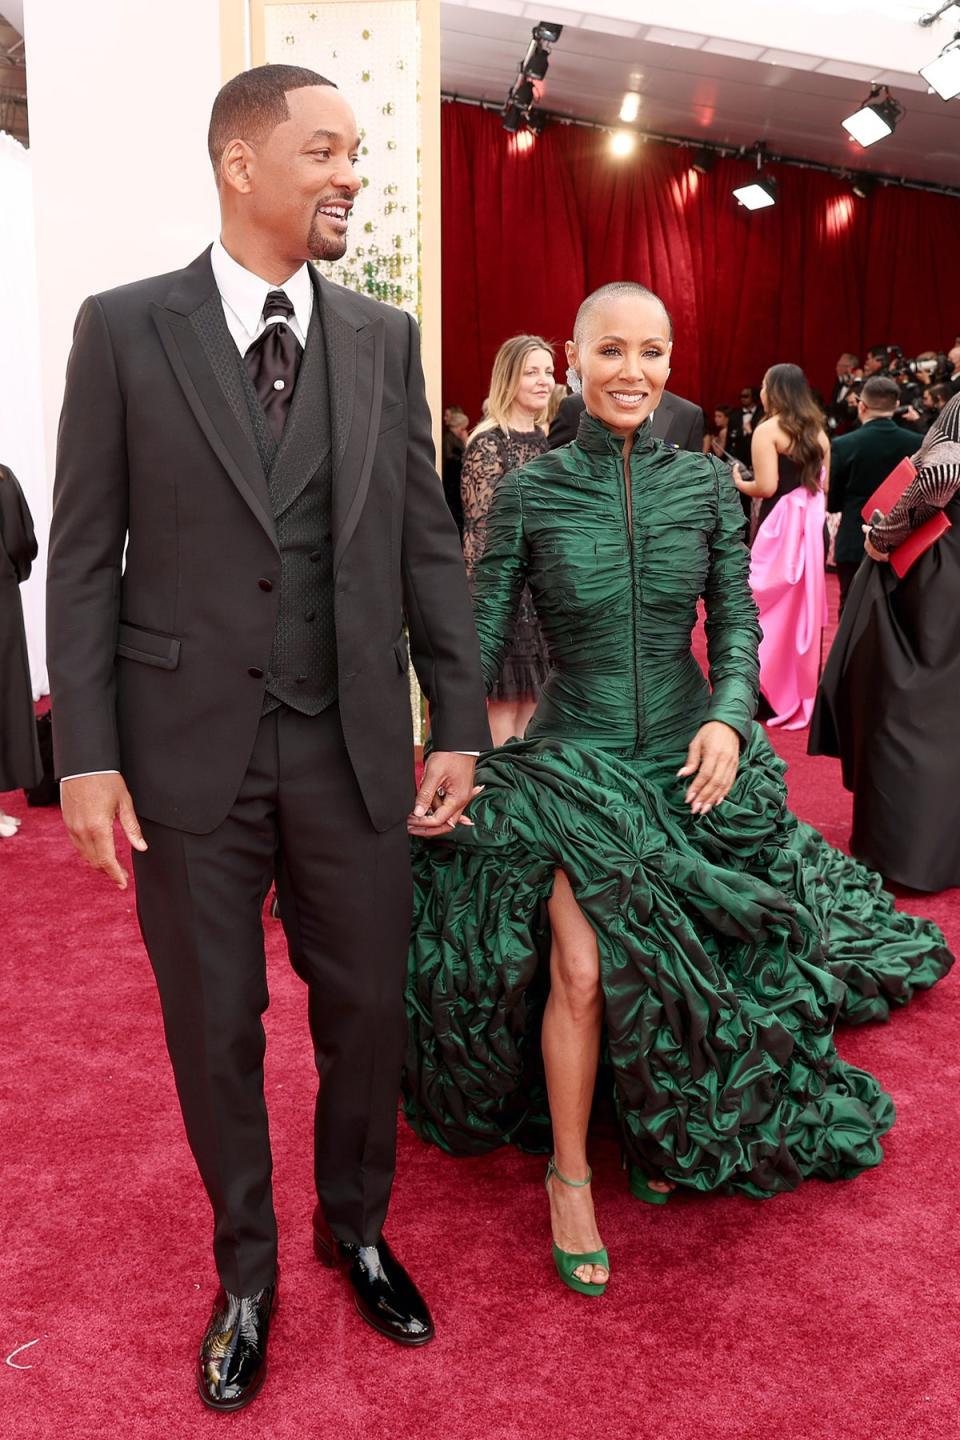 Will Smith and wife Jada Pinkett Smith on the Oscars red carpet before the attack (Getty Images)